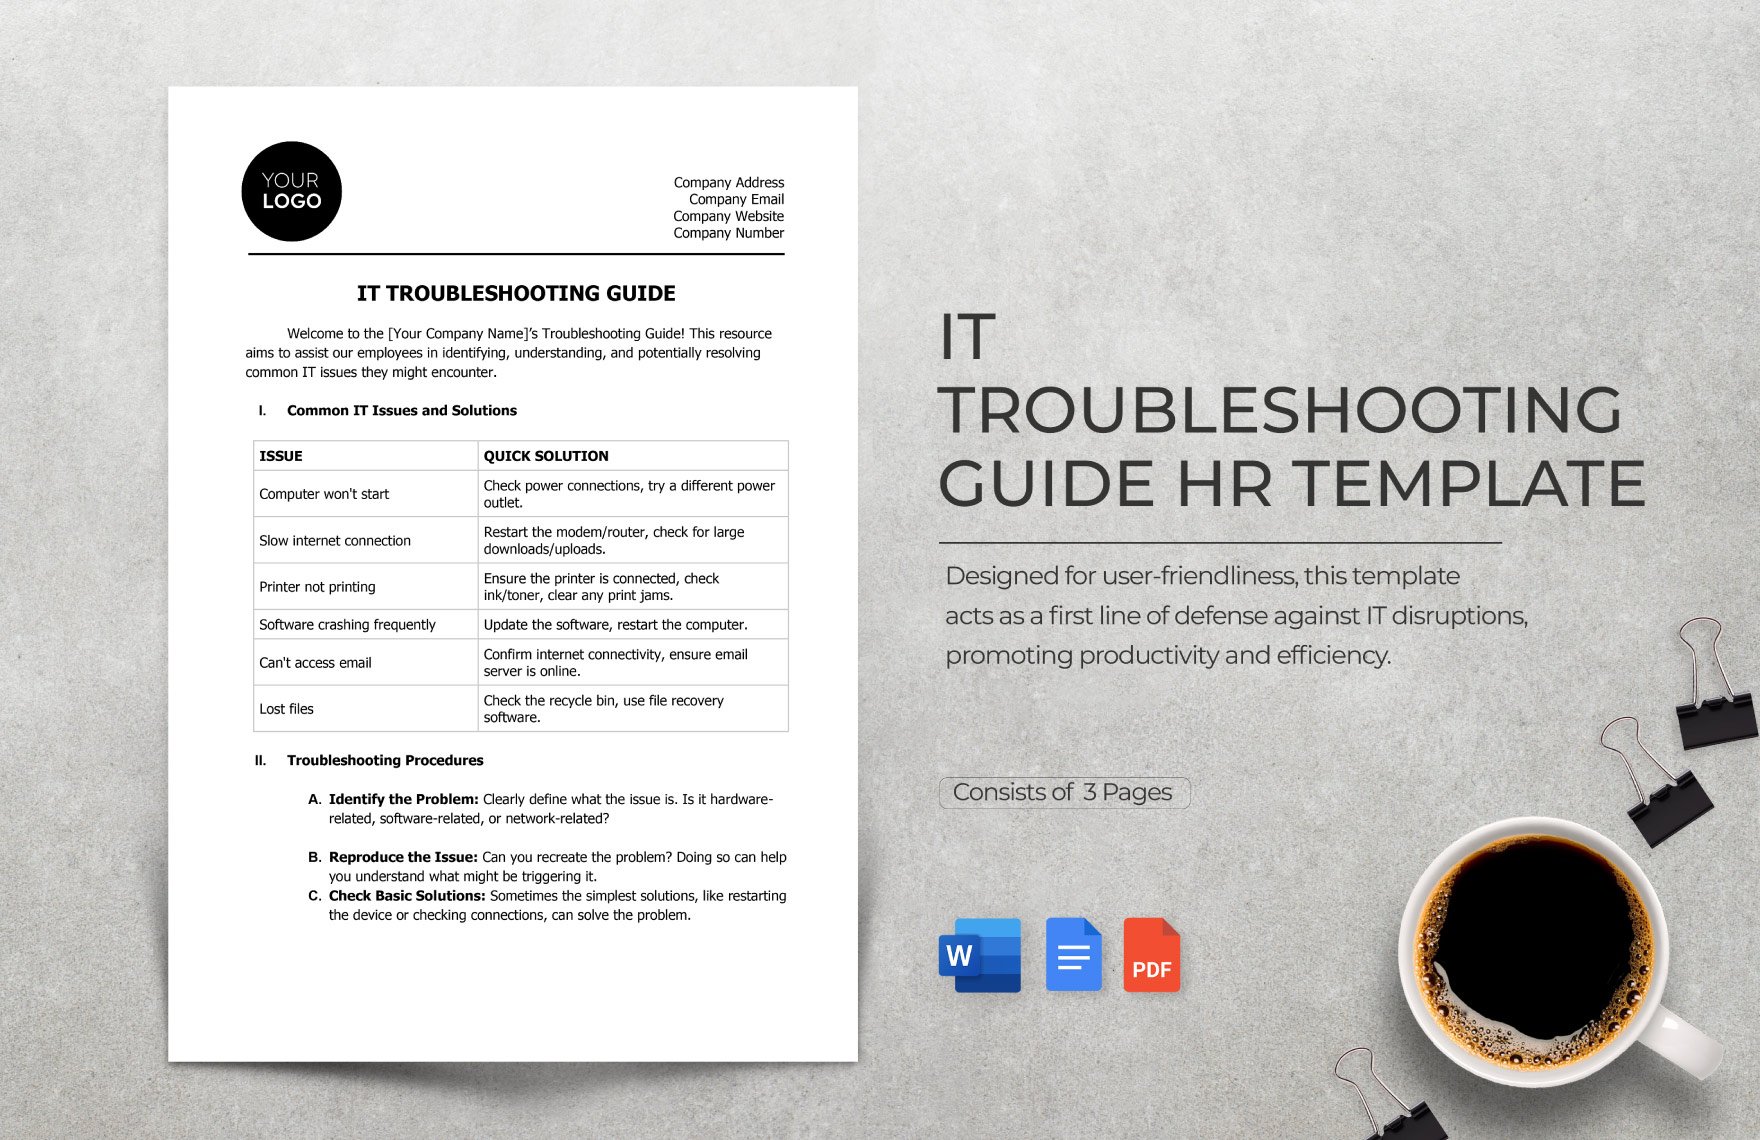 IT Troubleshooting Guide HR Template